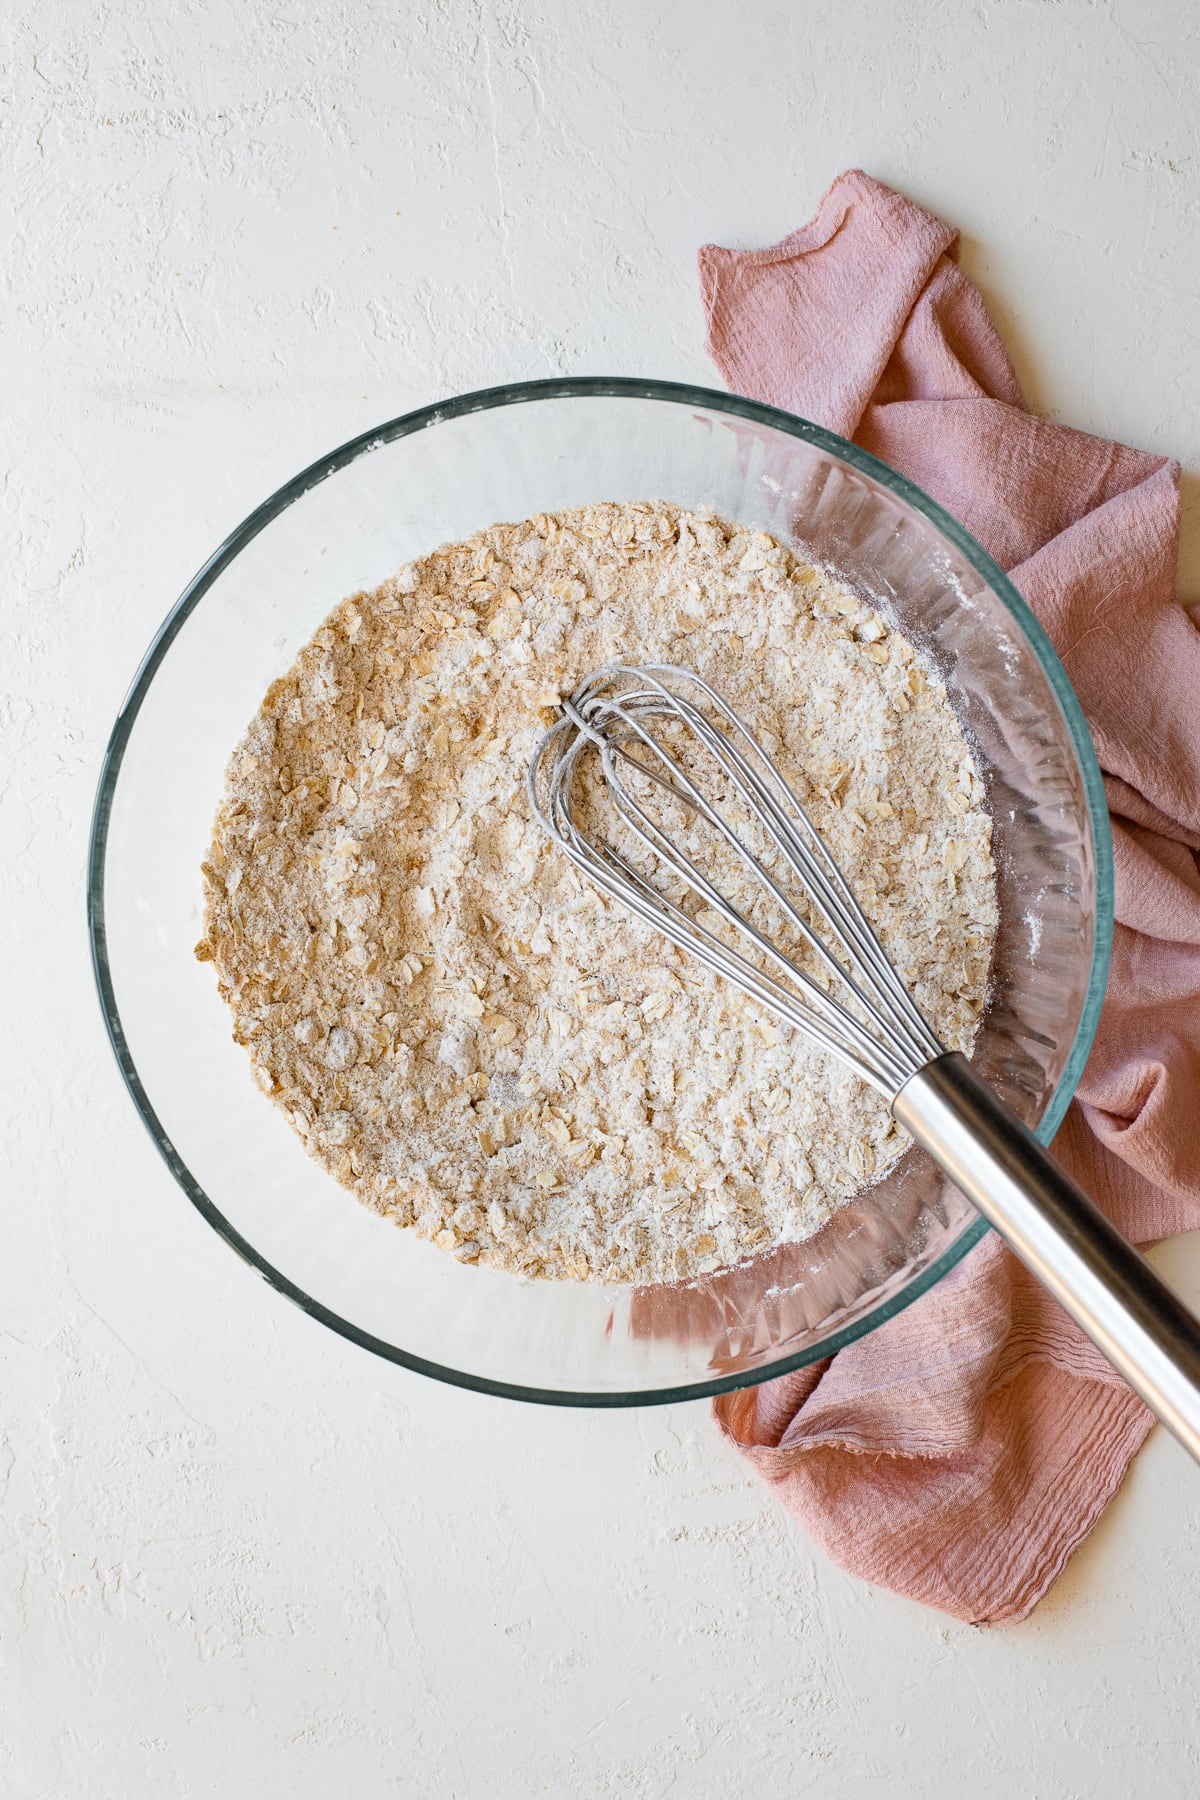 Dry ingredients for crumble topping whisked together in a large bowl